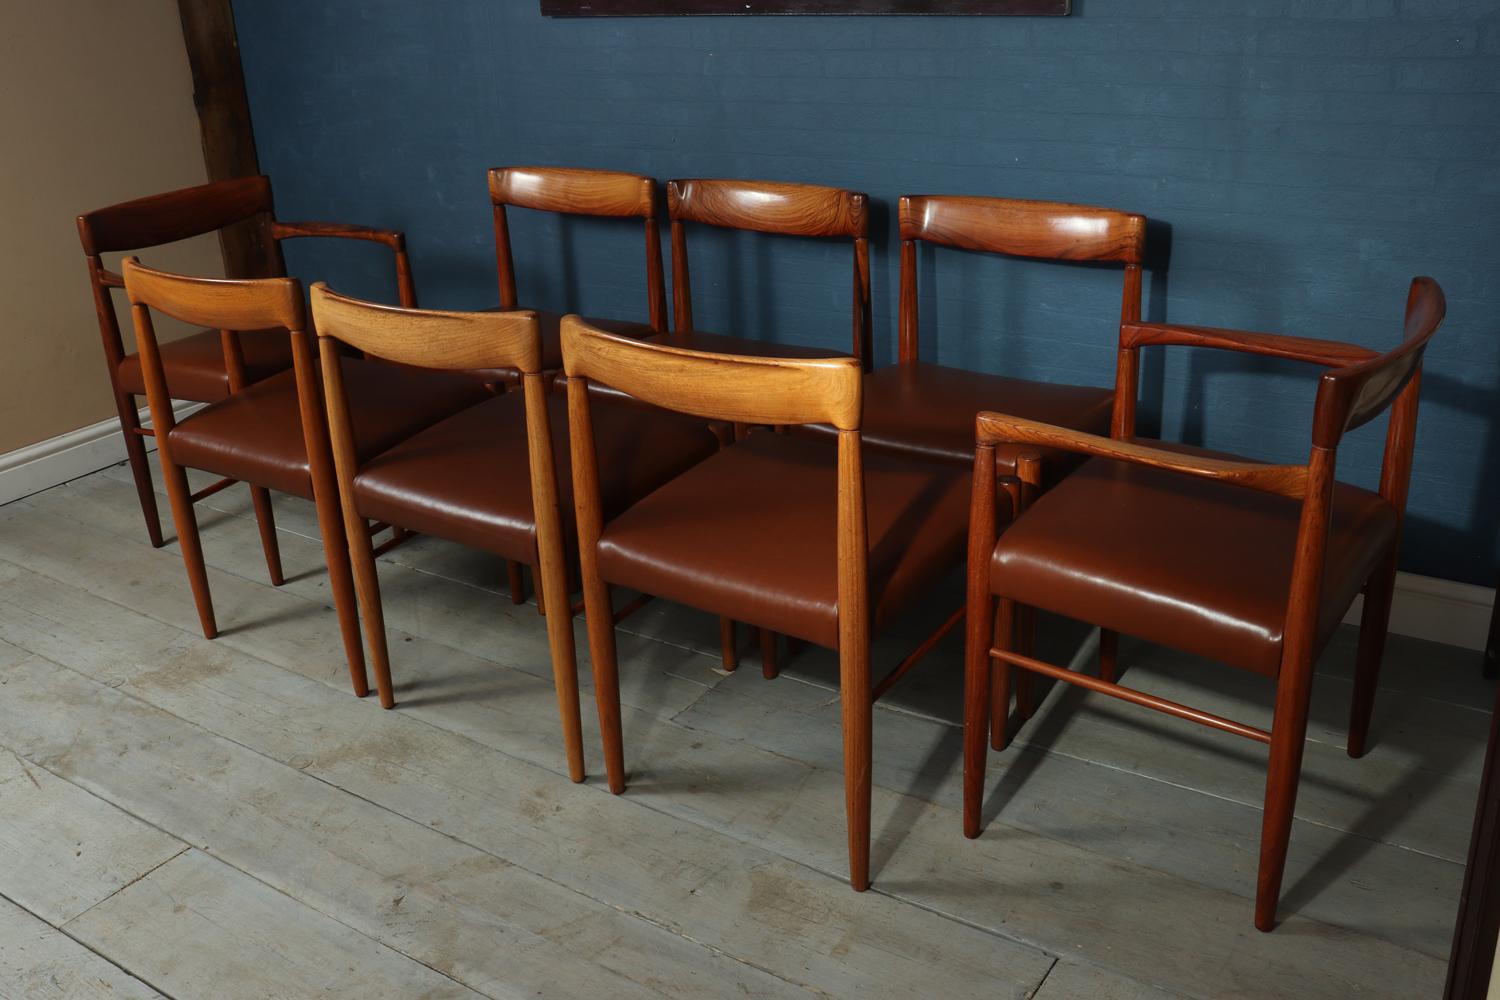 Set of 8 dining chairs by Bramin
A set of 8 dining (6 side chairs and 2 carvers) chairs in rosewood produced by Bramin in the 1960s in Denmark, the chairs are structulary sound with no loose joints or old breaks the frames have been cleaned and